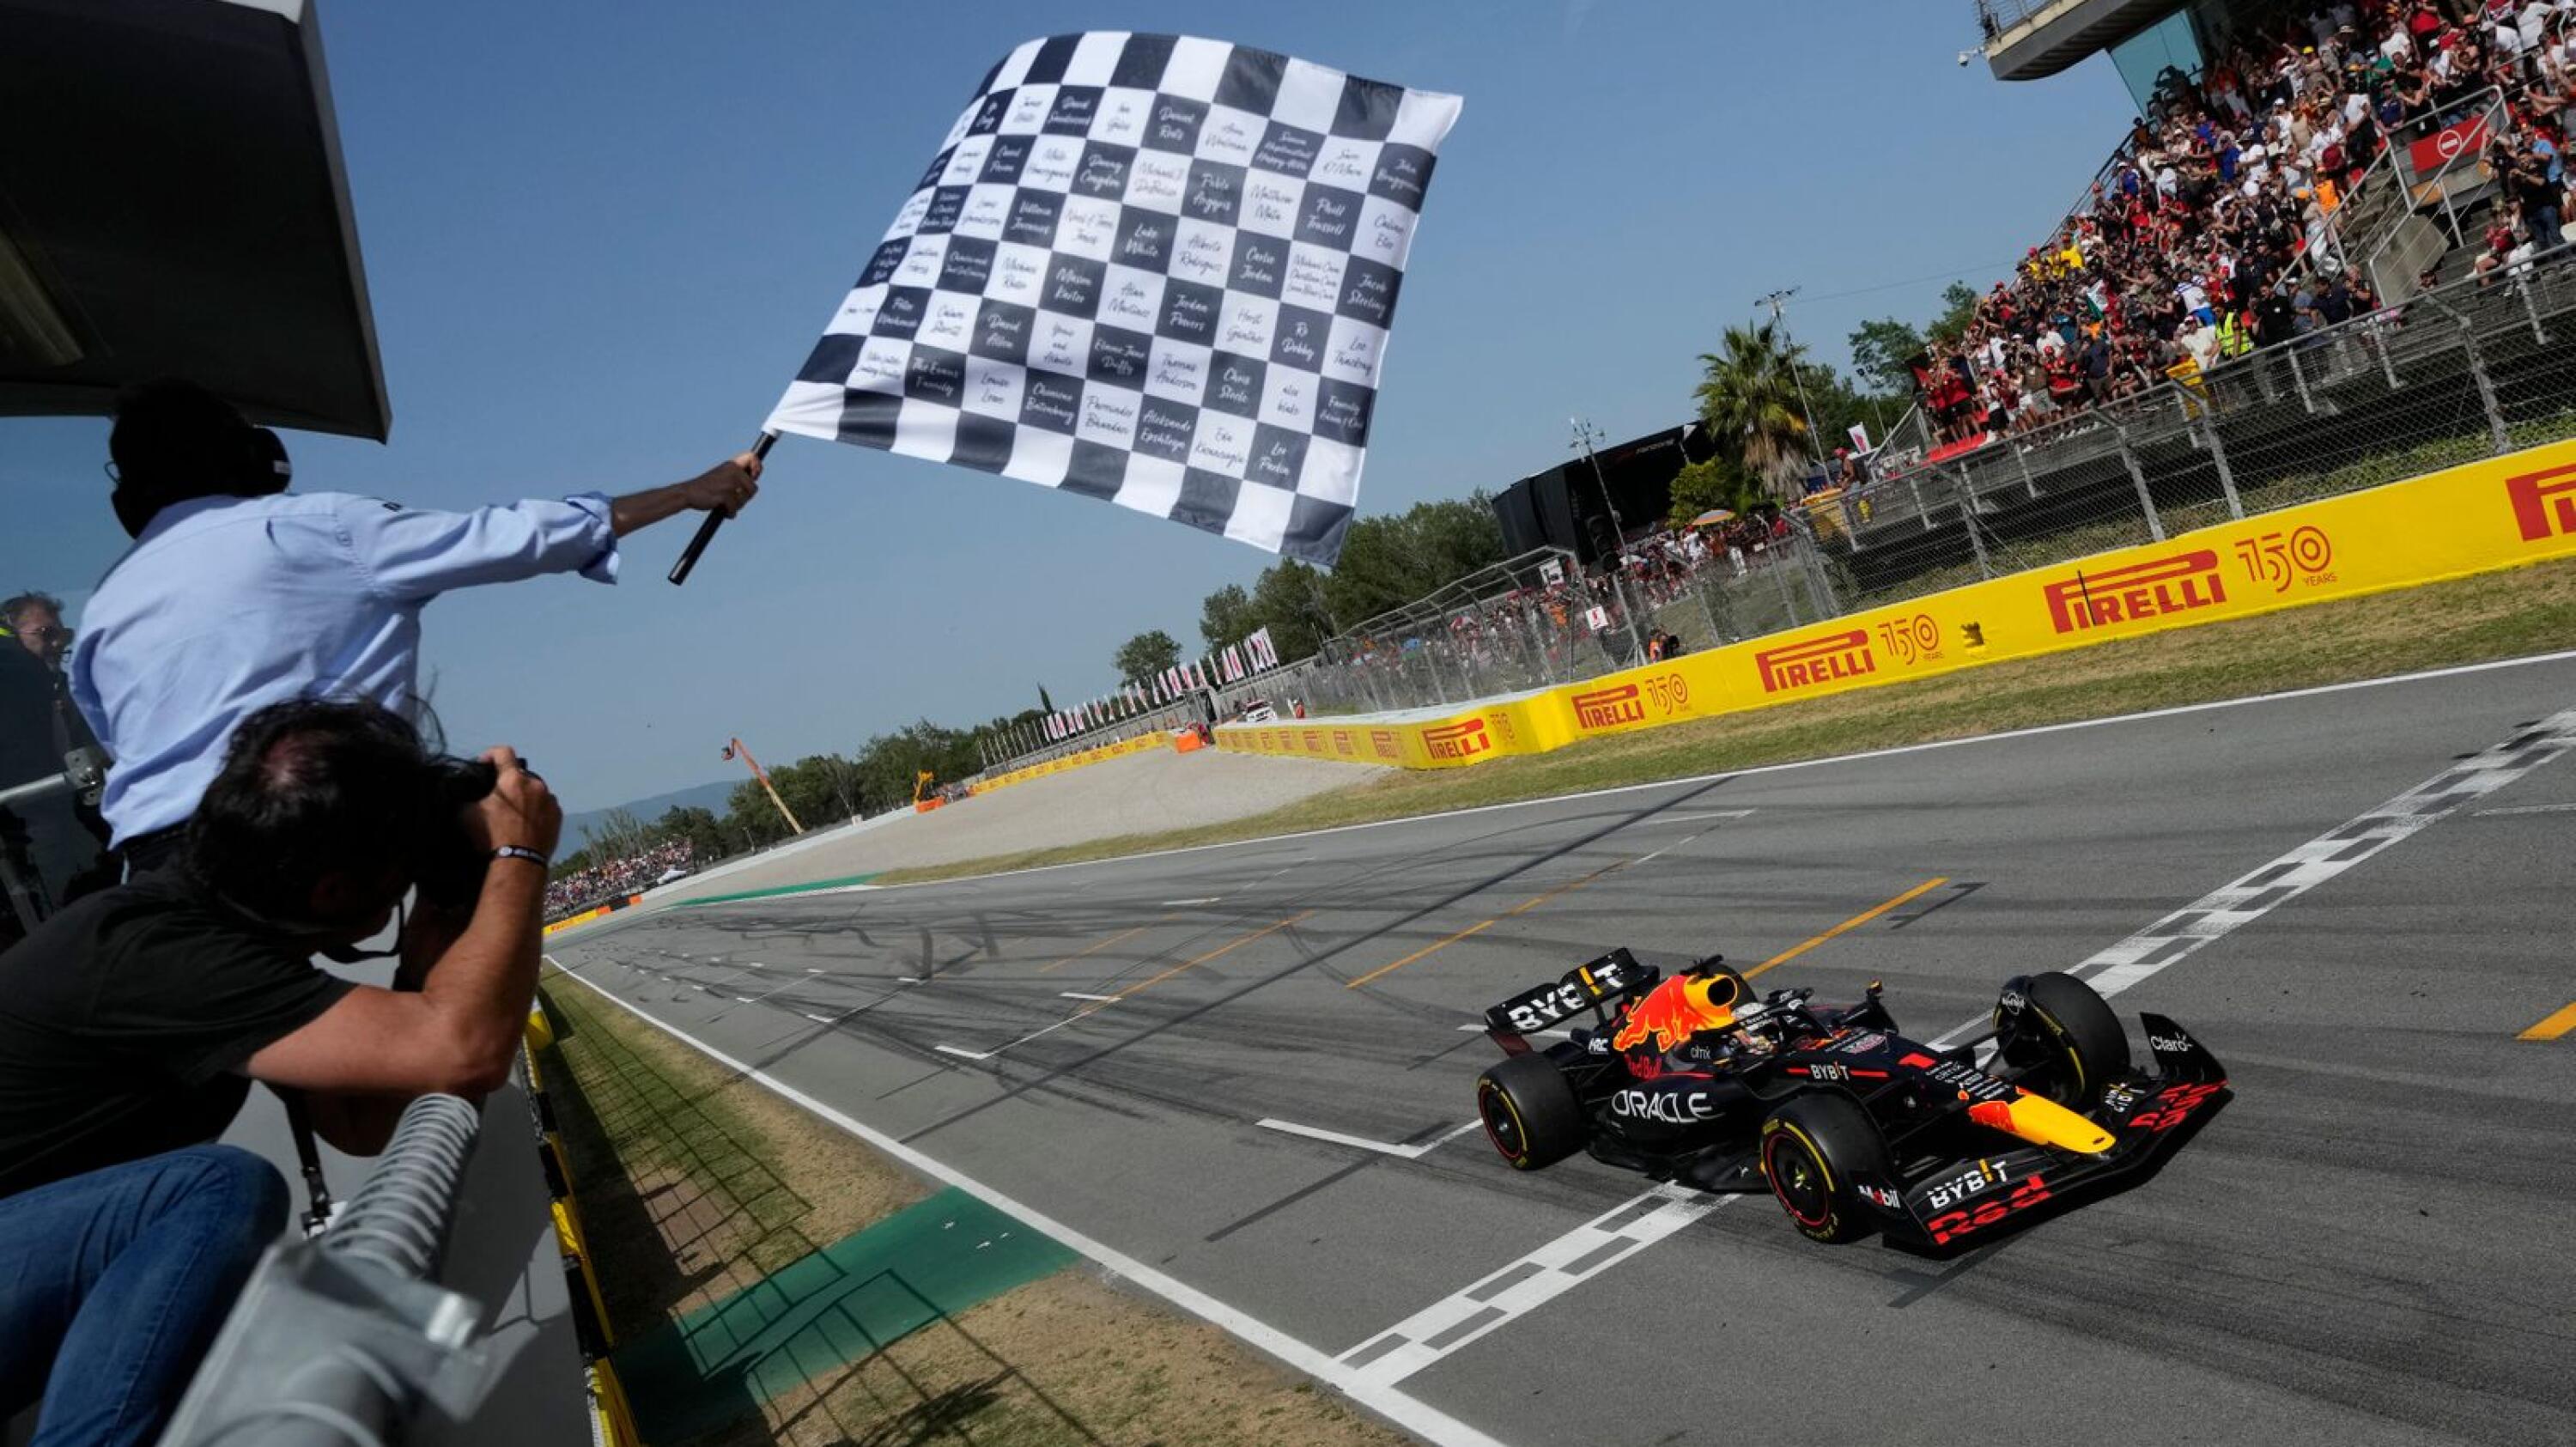 Red Bull's Dutch driver Max Verstappen crosses the finish line in first place during the Spanish Formula One Grand Prix at the Circuit de Catalunya in Montmelo, on the outskirts of Barcelona on Sunday